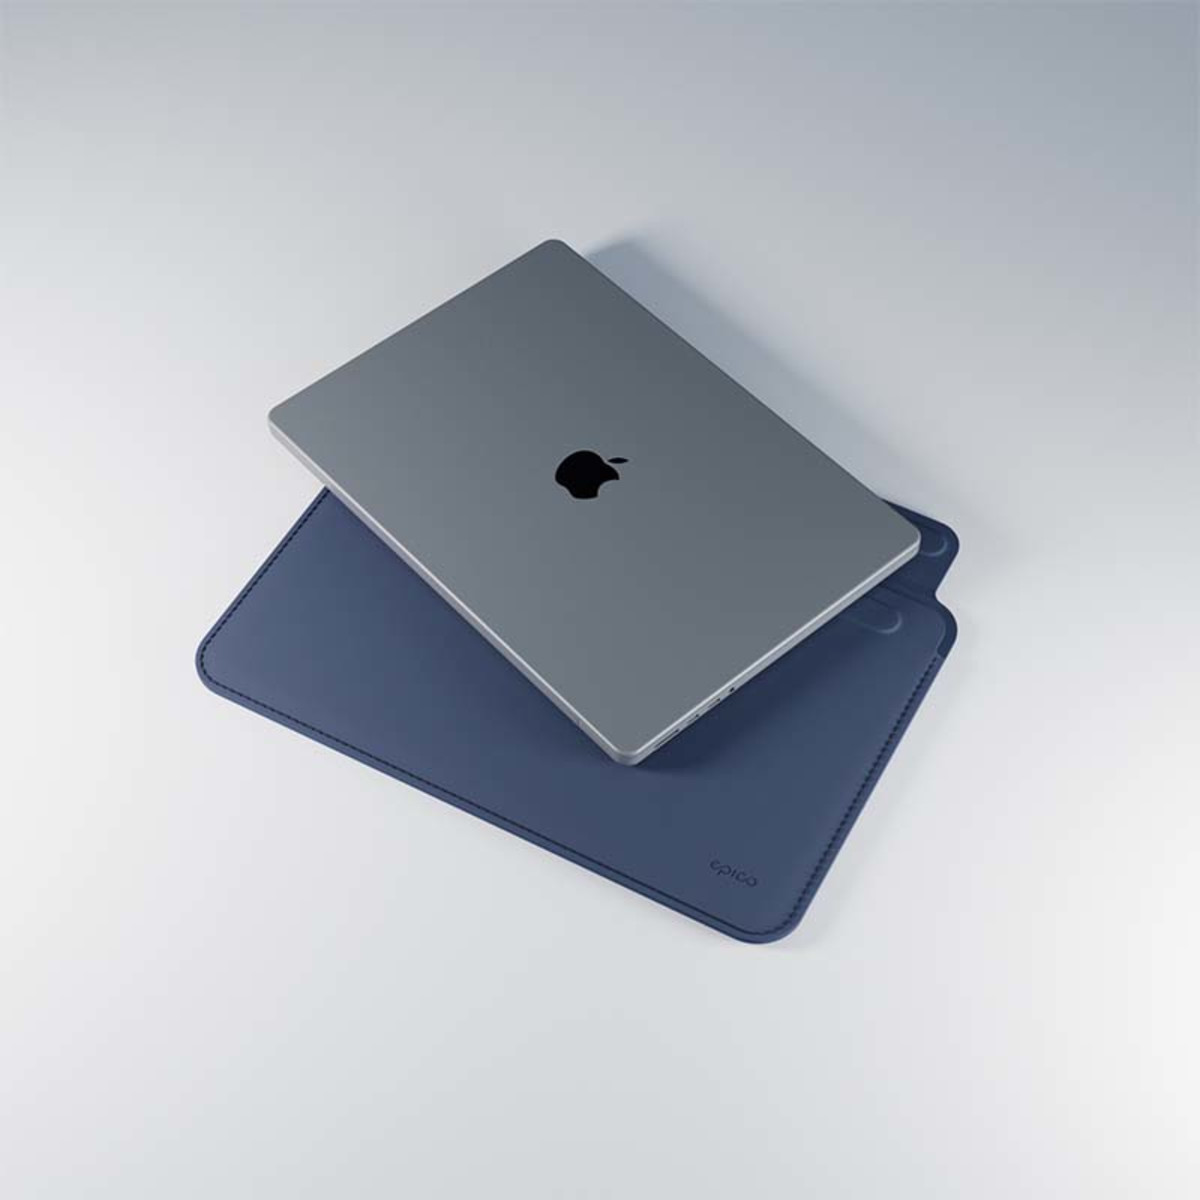 Leather Sleeve For Macbook 13.3 - Blue